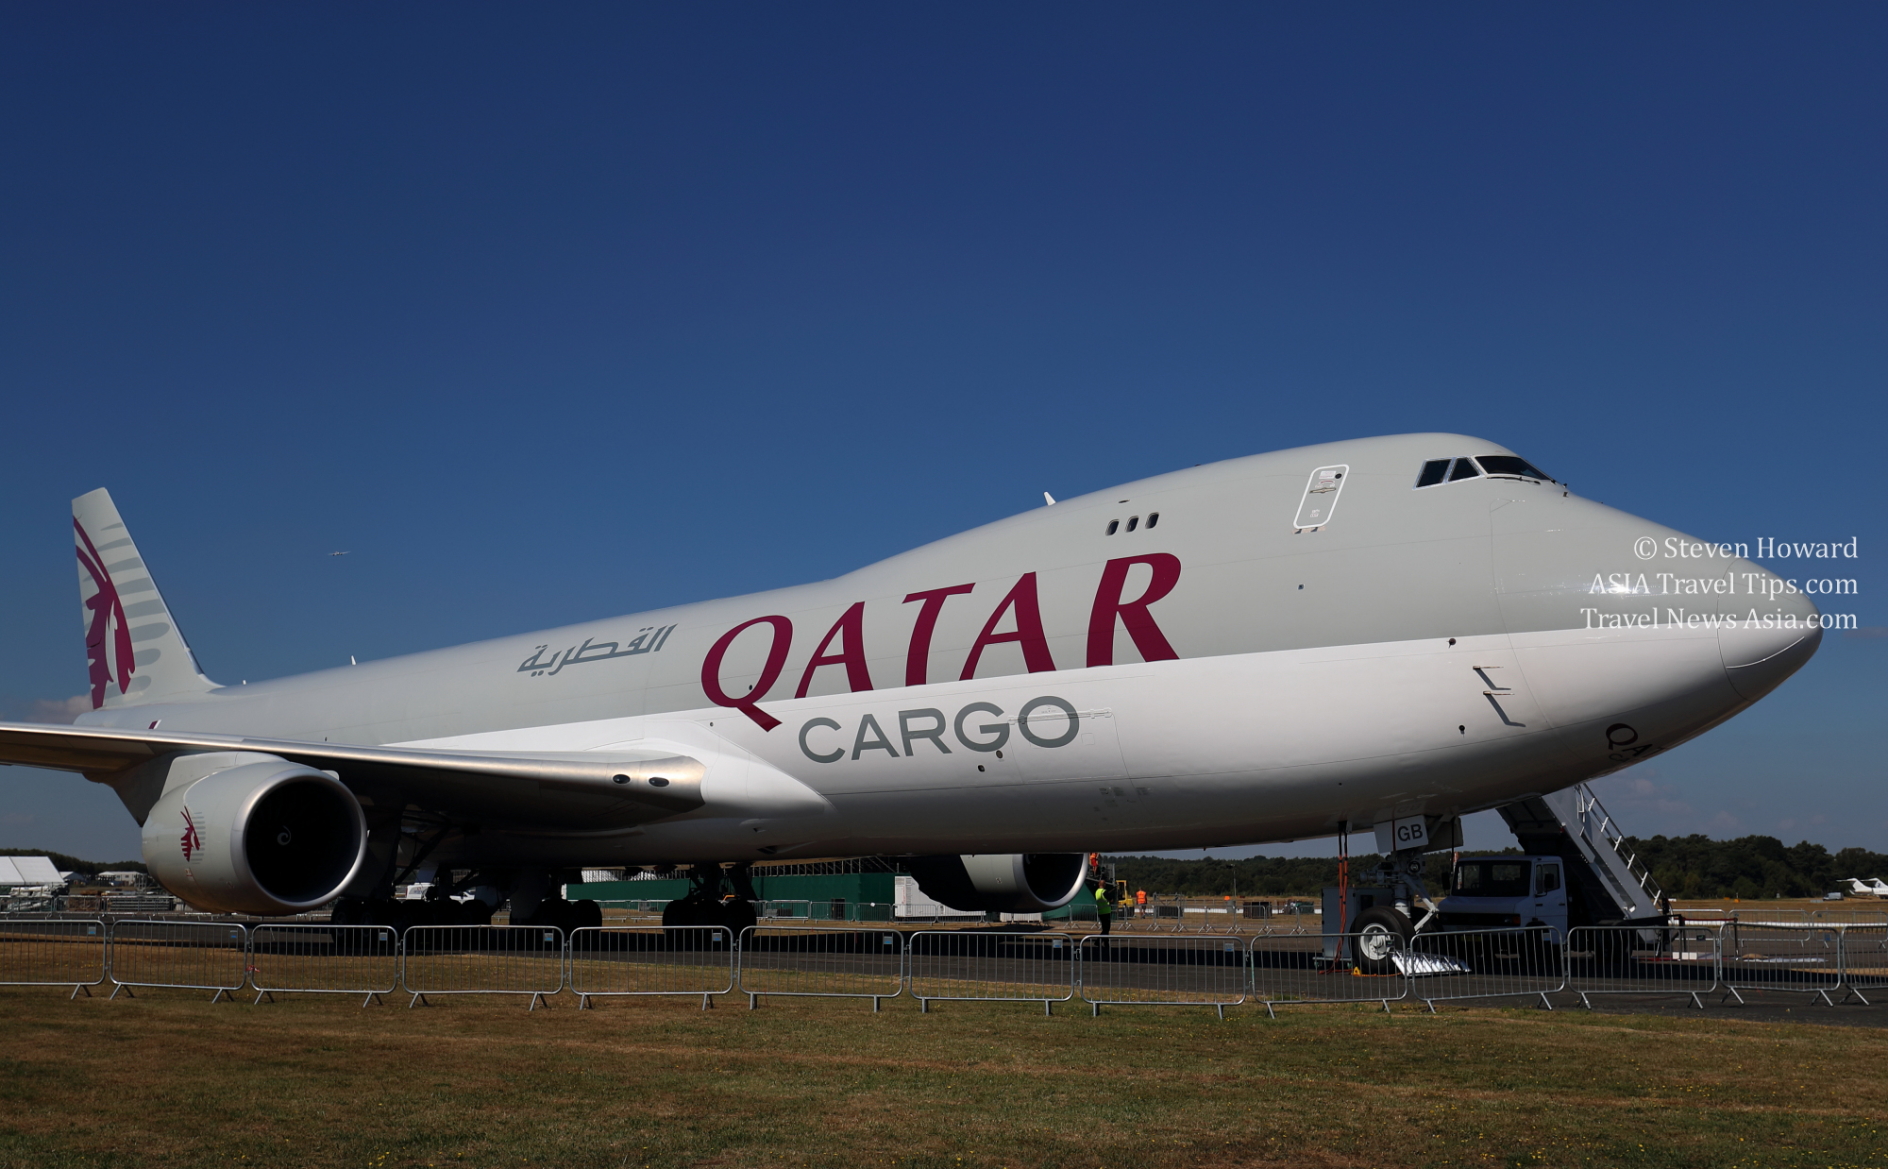 Qatar Airways Cargo Boeing 747F. Picture by Steven Howard of TravelNewsAsia.com Click to enlarge.